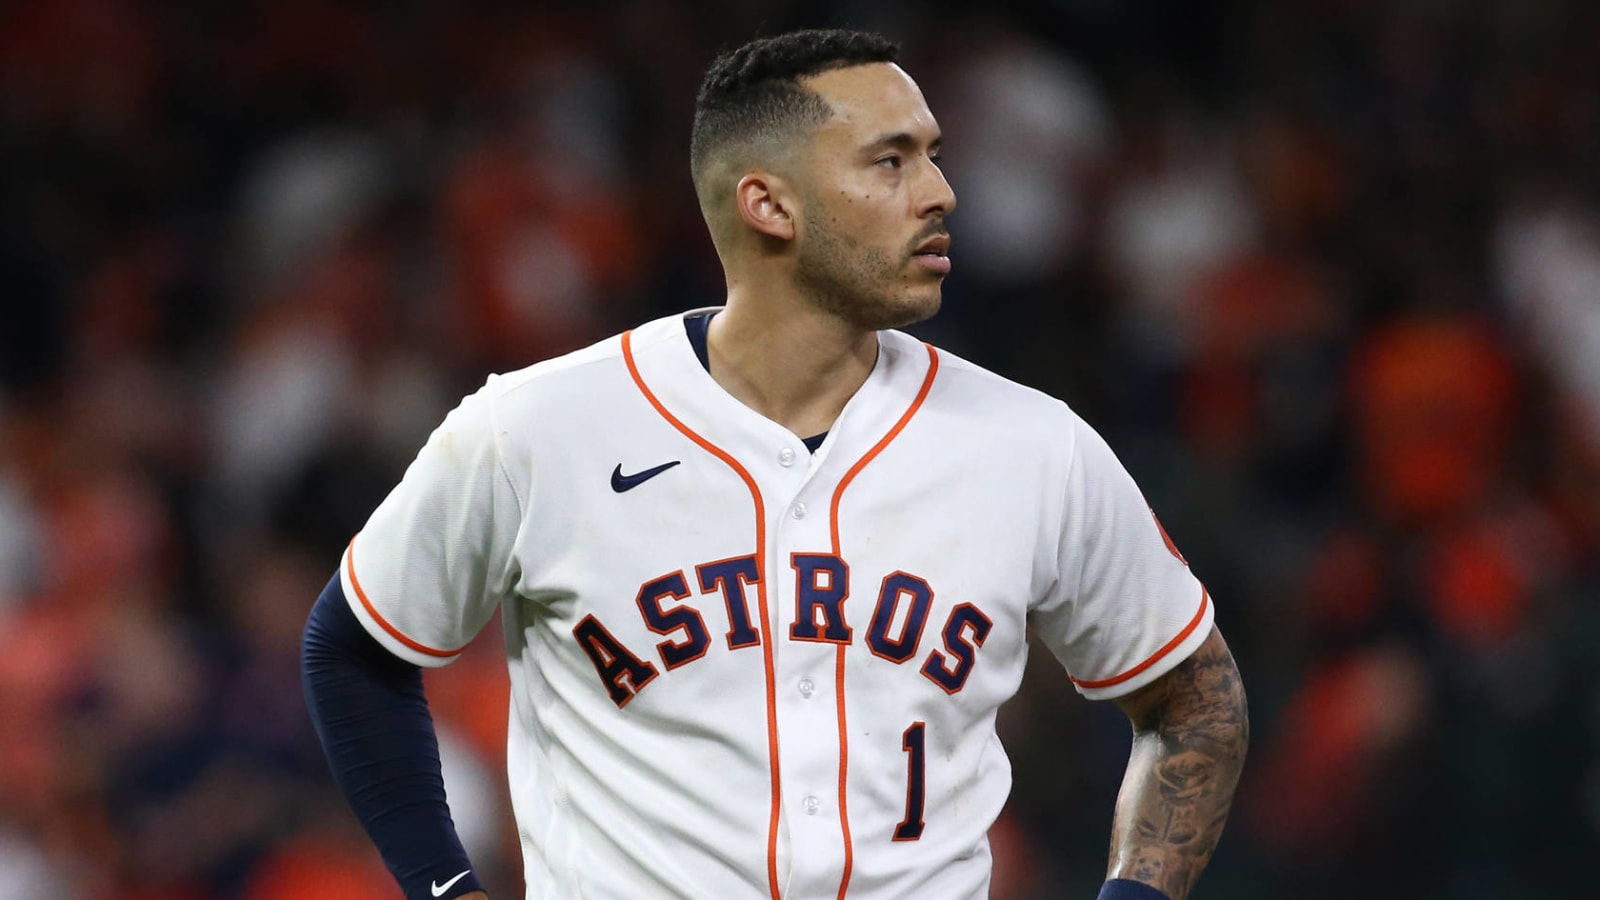 Astros sign Carlos Correa's brother J.C. Correa as undrafted player